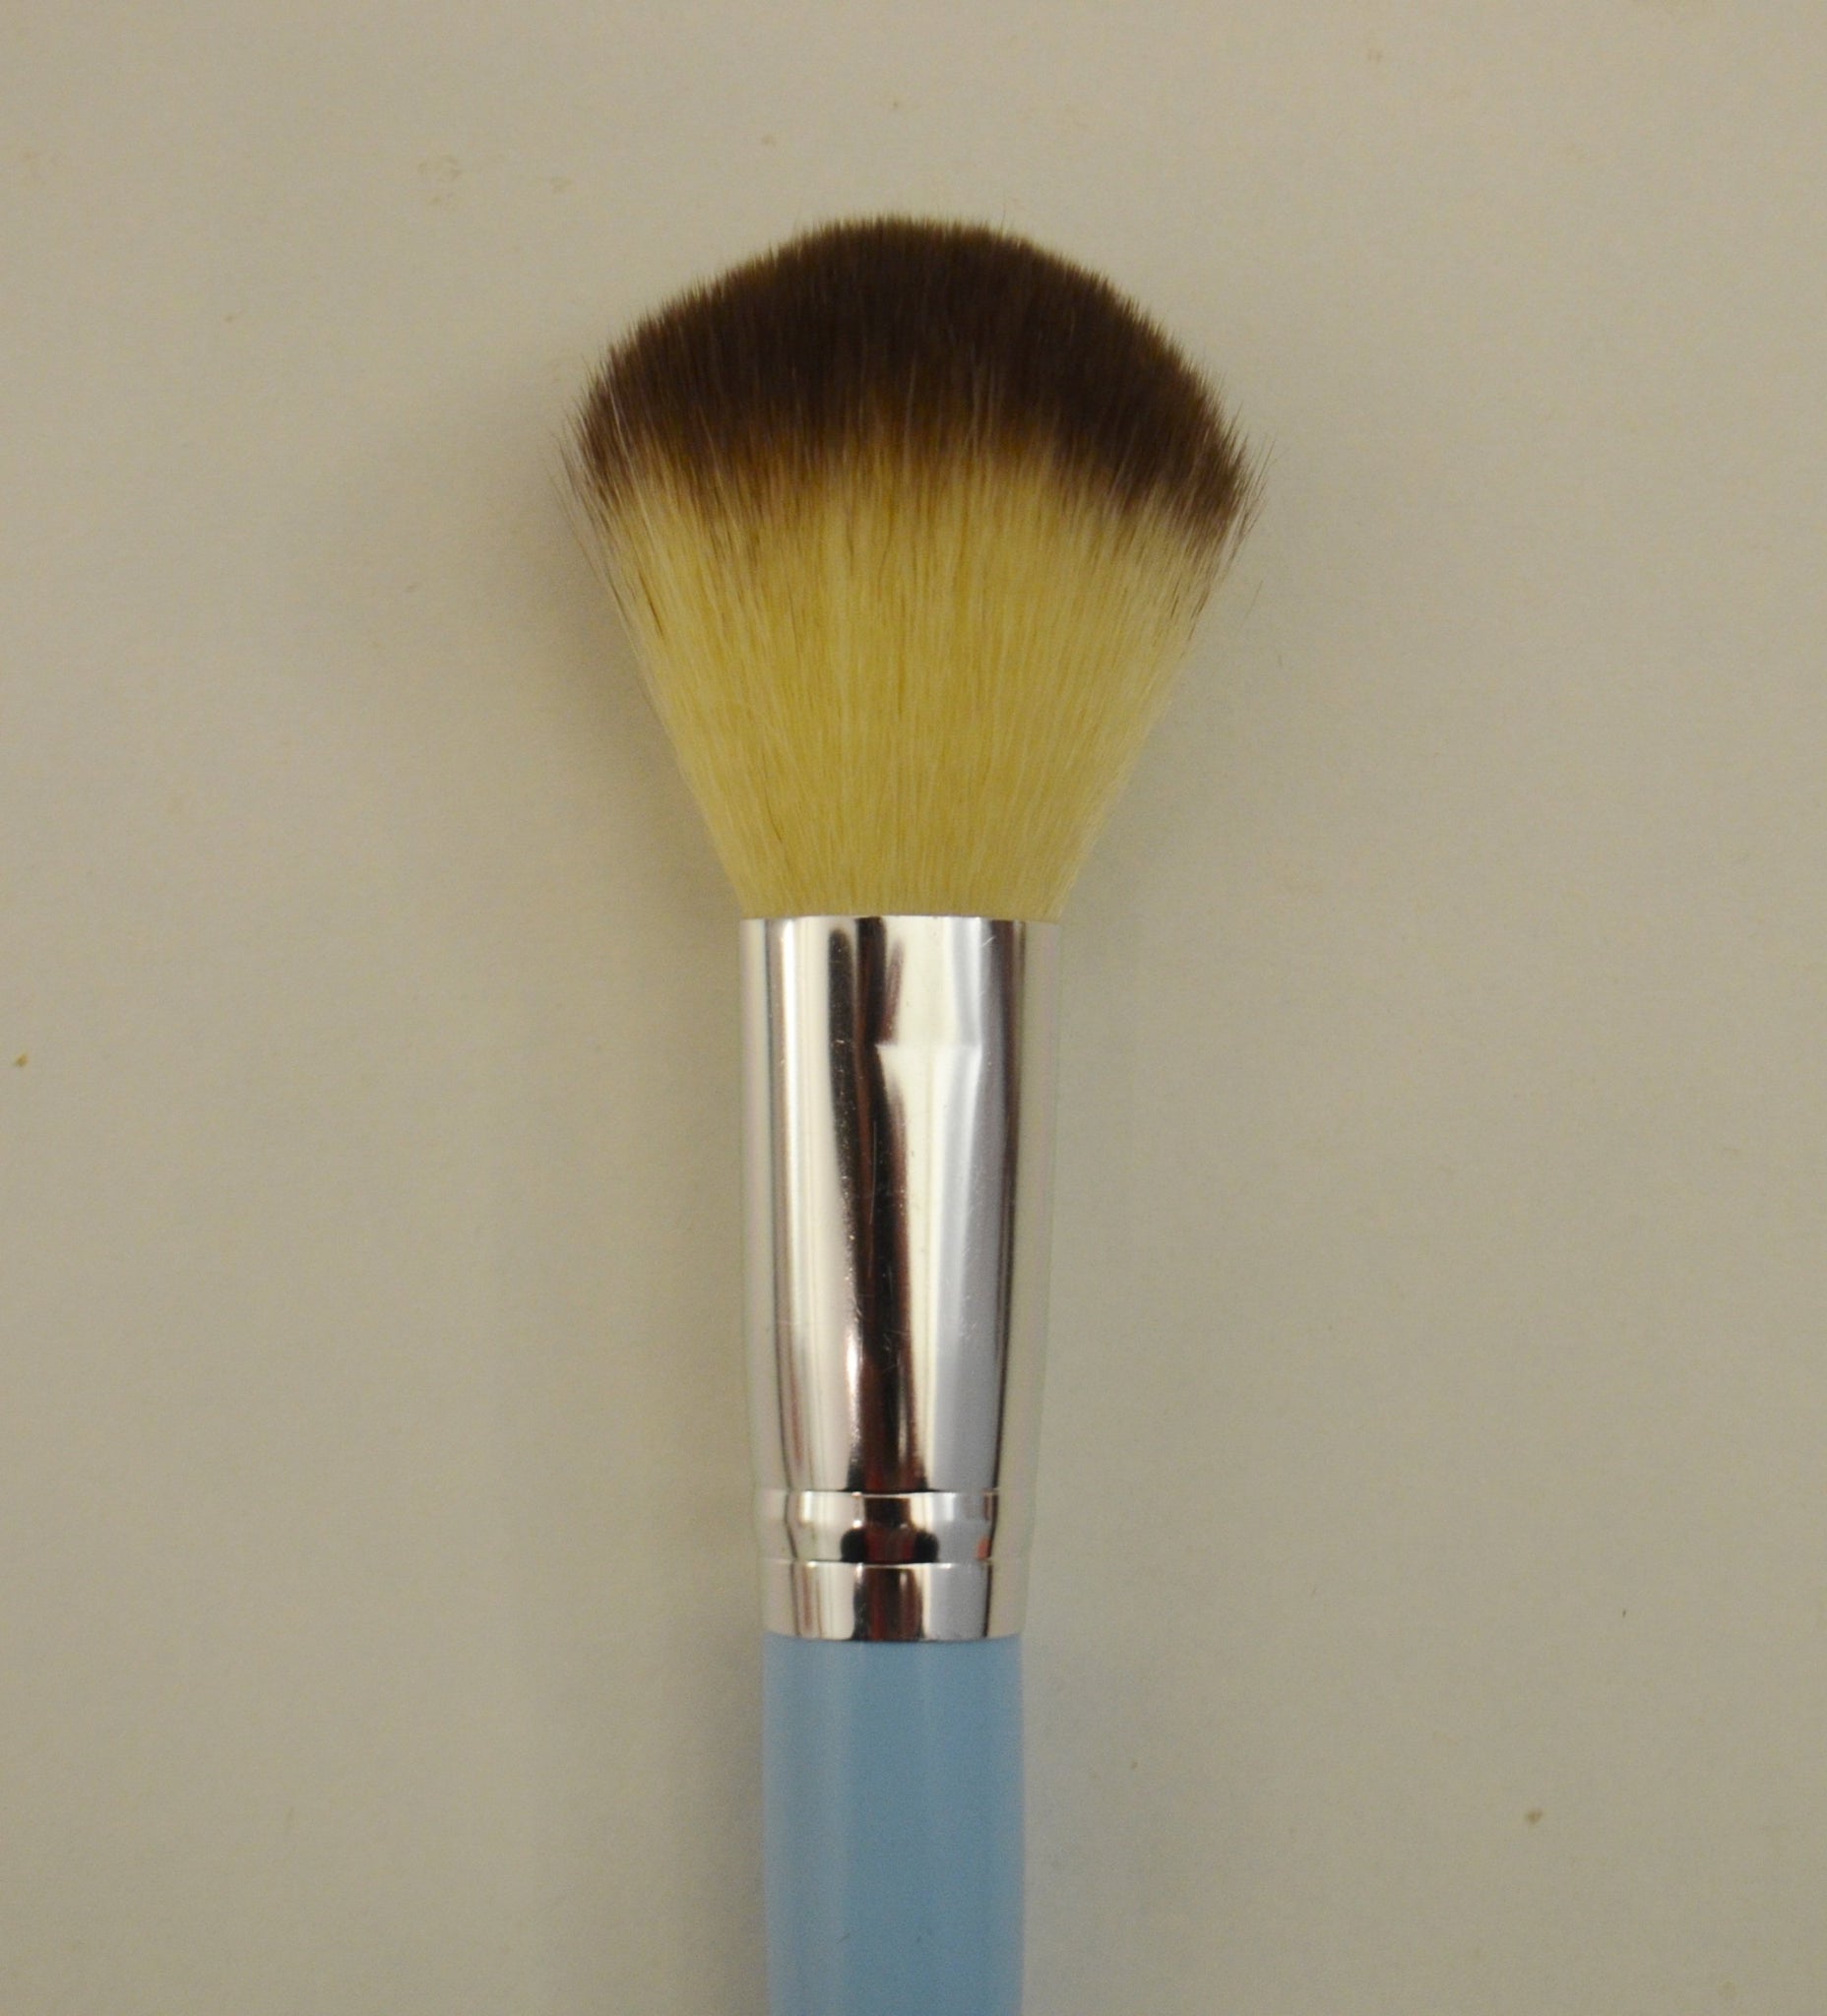 Duel End Powder & Foundation Brush by Le Keux Cosmetics - True and authentic vintage style clothing, inspired by the Classic styles of CC41 , WW2 and the fun 1950s RocknRoll era, for everyday wear plus events like Goodwood Revival, Twinwood Festival and Viva Las Vegas Rockabilly Weekend Rock n Romance Le Keux Cosmetics